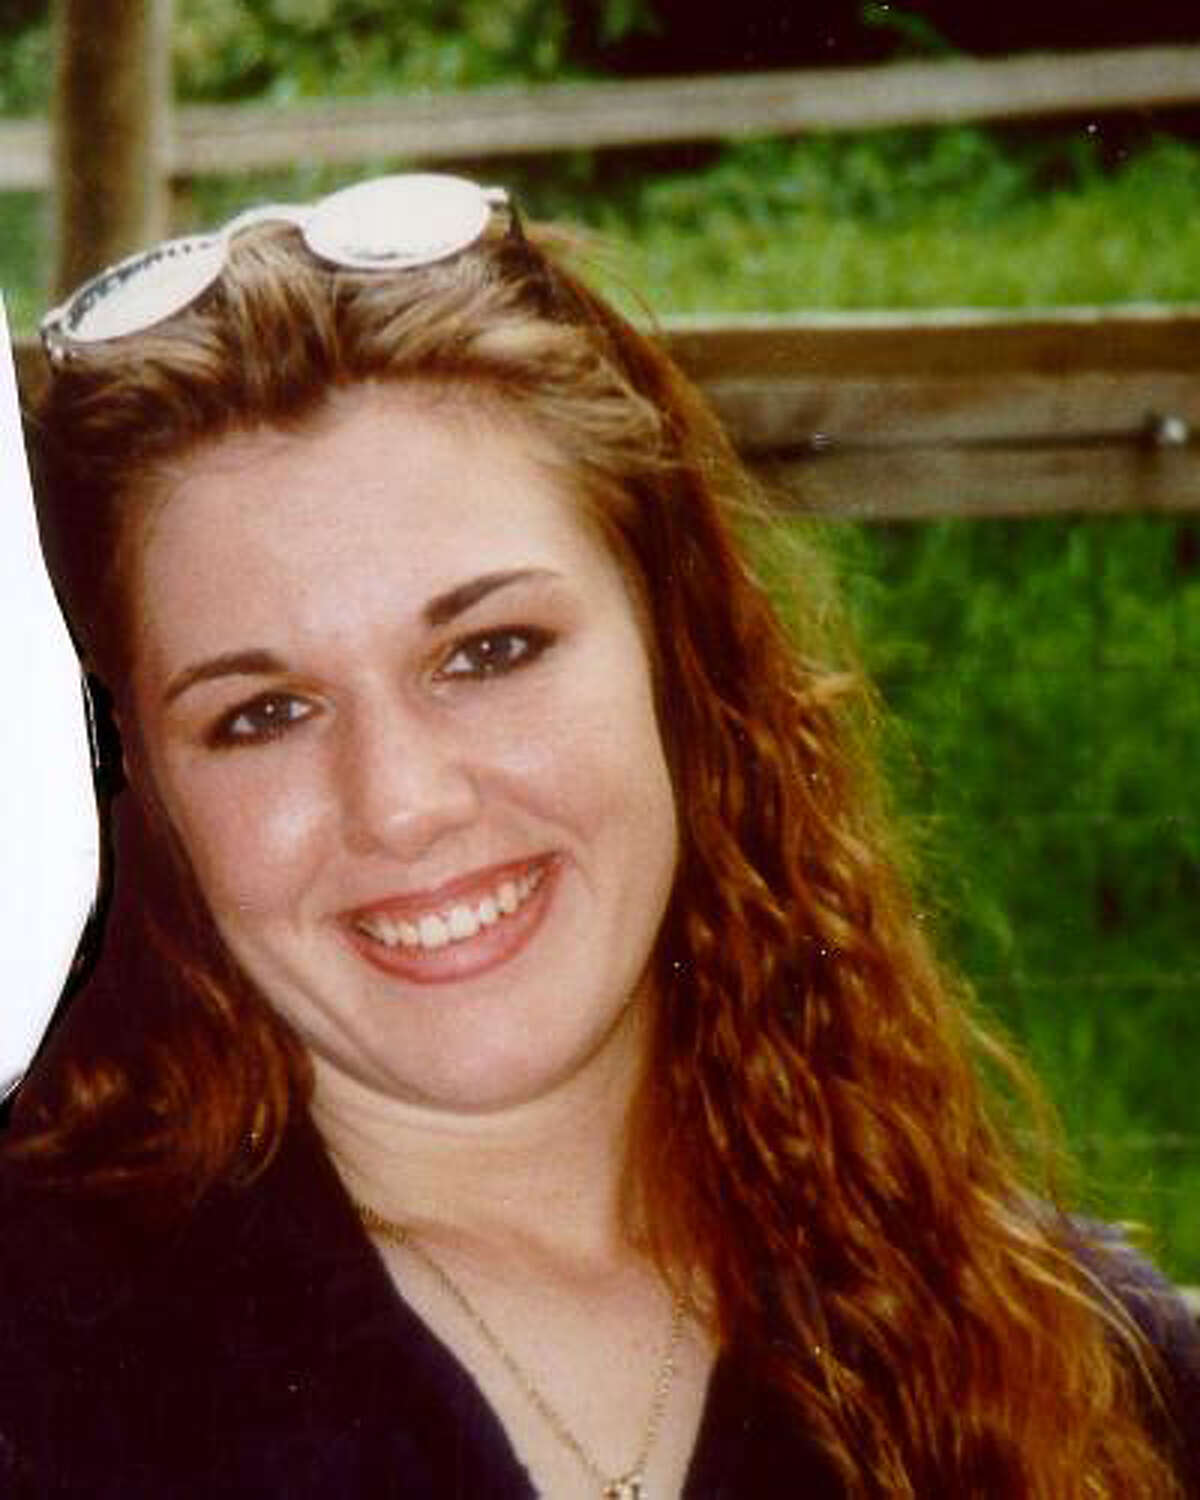 Kelli Cox, a young woman who disappeared in 1997 and is believed dead. She was a University of North Texas honor student who went missing after a tour of the Denton jail with her criminology class. The current search in a pasture north of Angleton in Brazoria County is for the body of 20-year-old Kelli Cox of Denton, Tx. At the center of the probe, is a convicted rapist and kidnapper, William Reece, who is now suspected of being a possible serial killer.